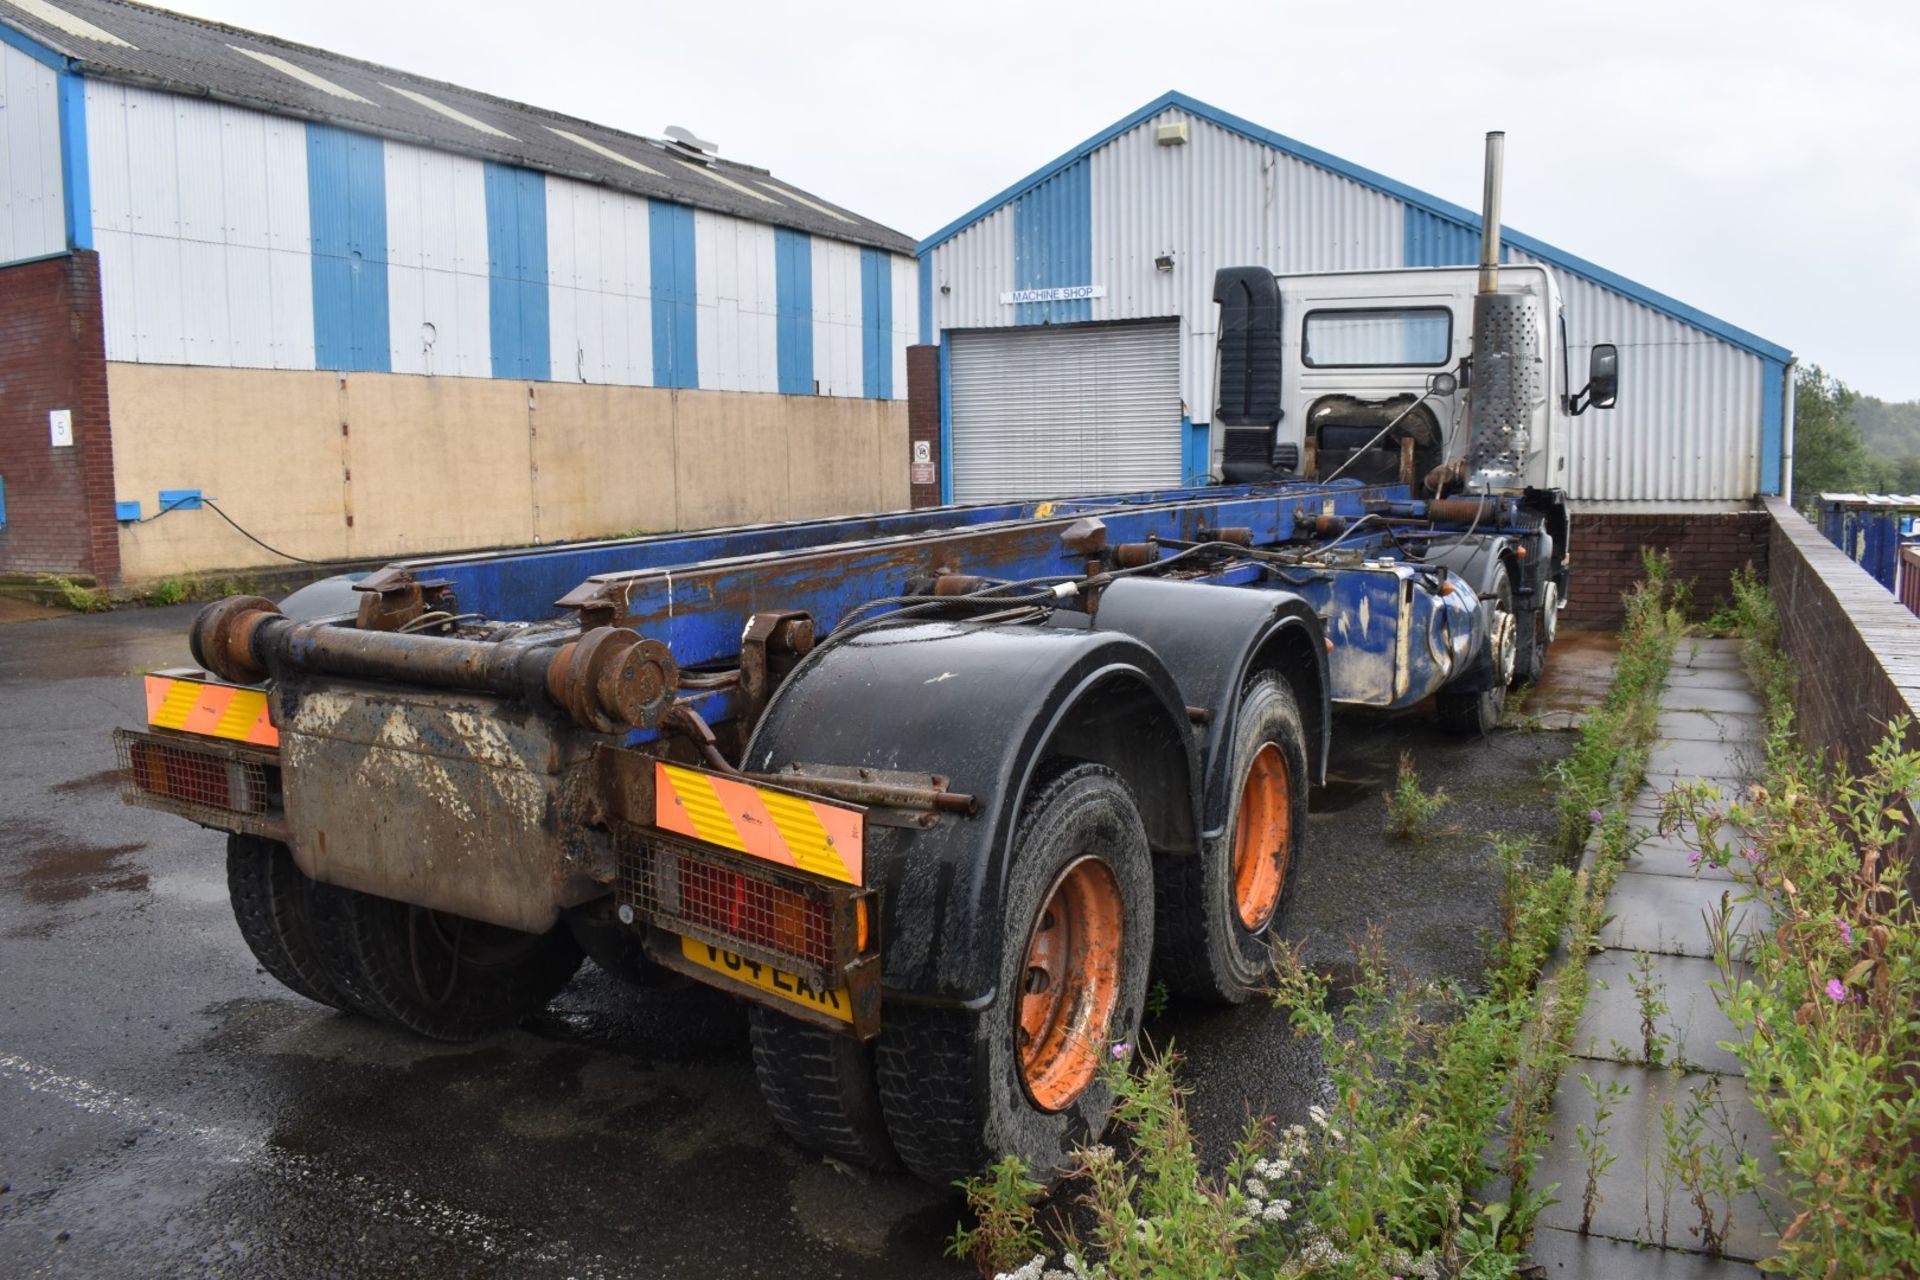 1 x Volvo 340 Plant Lorry With Tipper Chasis and Fitted Winch - CL547 - Location: South Yorkshire. - Image 13 of 25